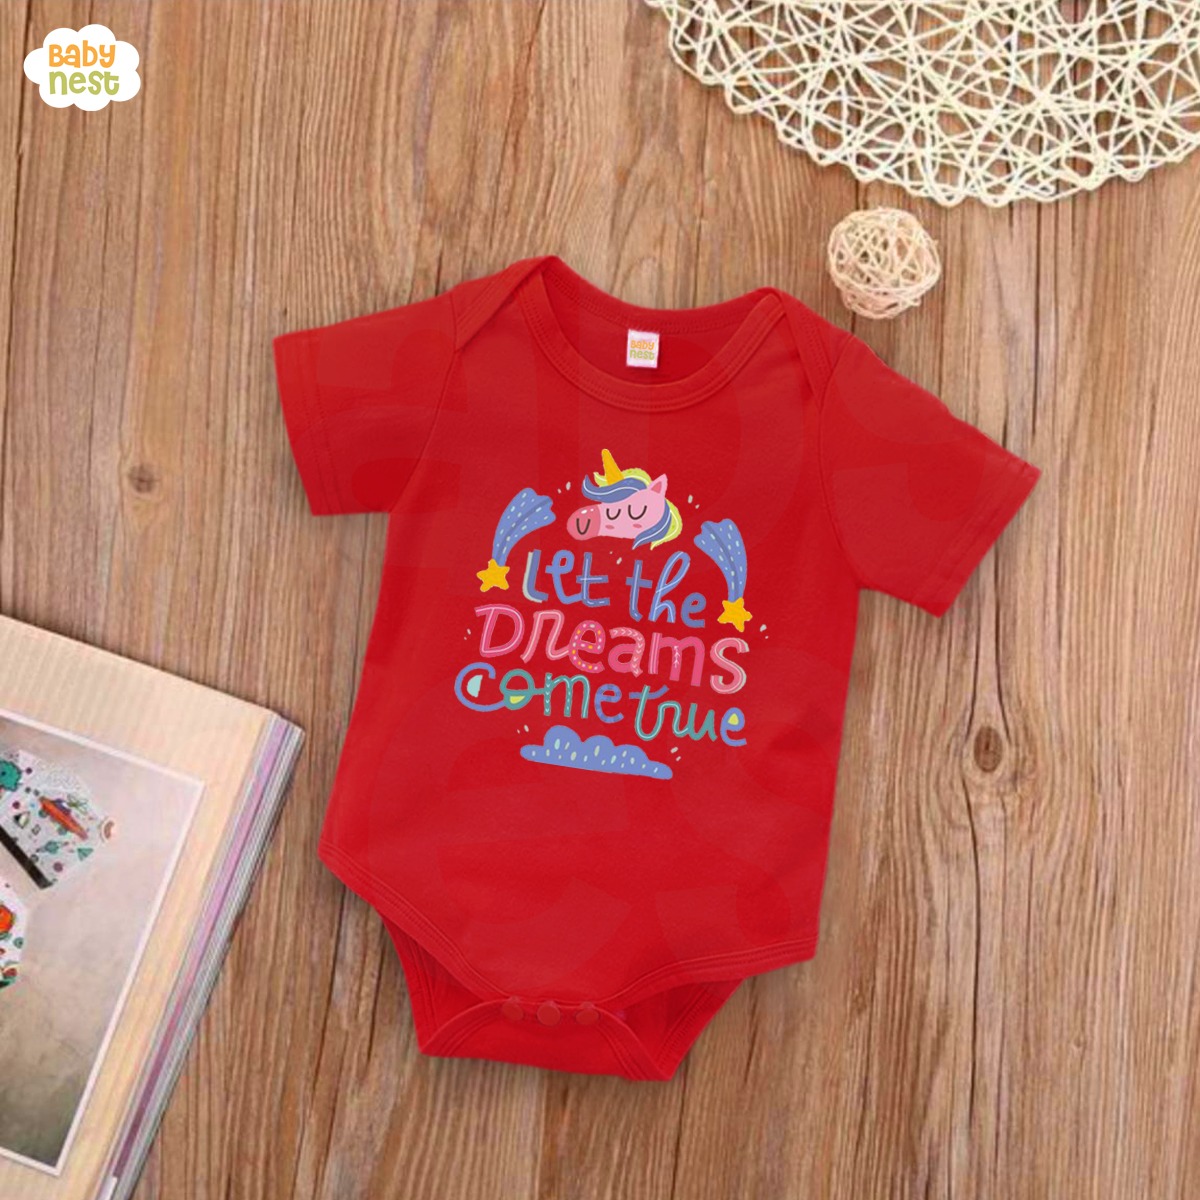 Let the Dreams Come True - (Red) RBT 118 Romper For Kids